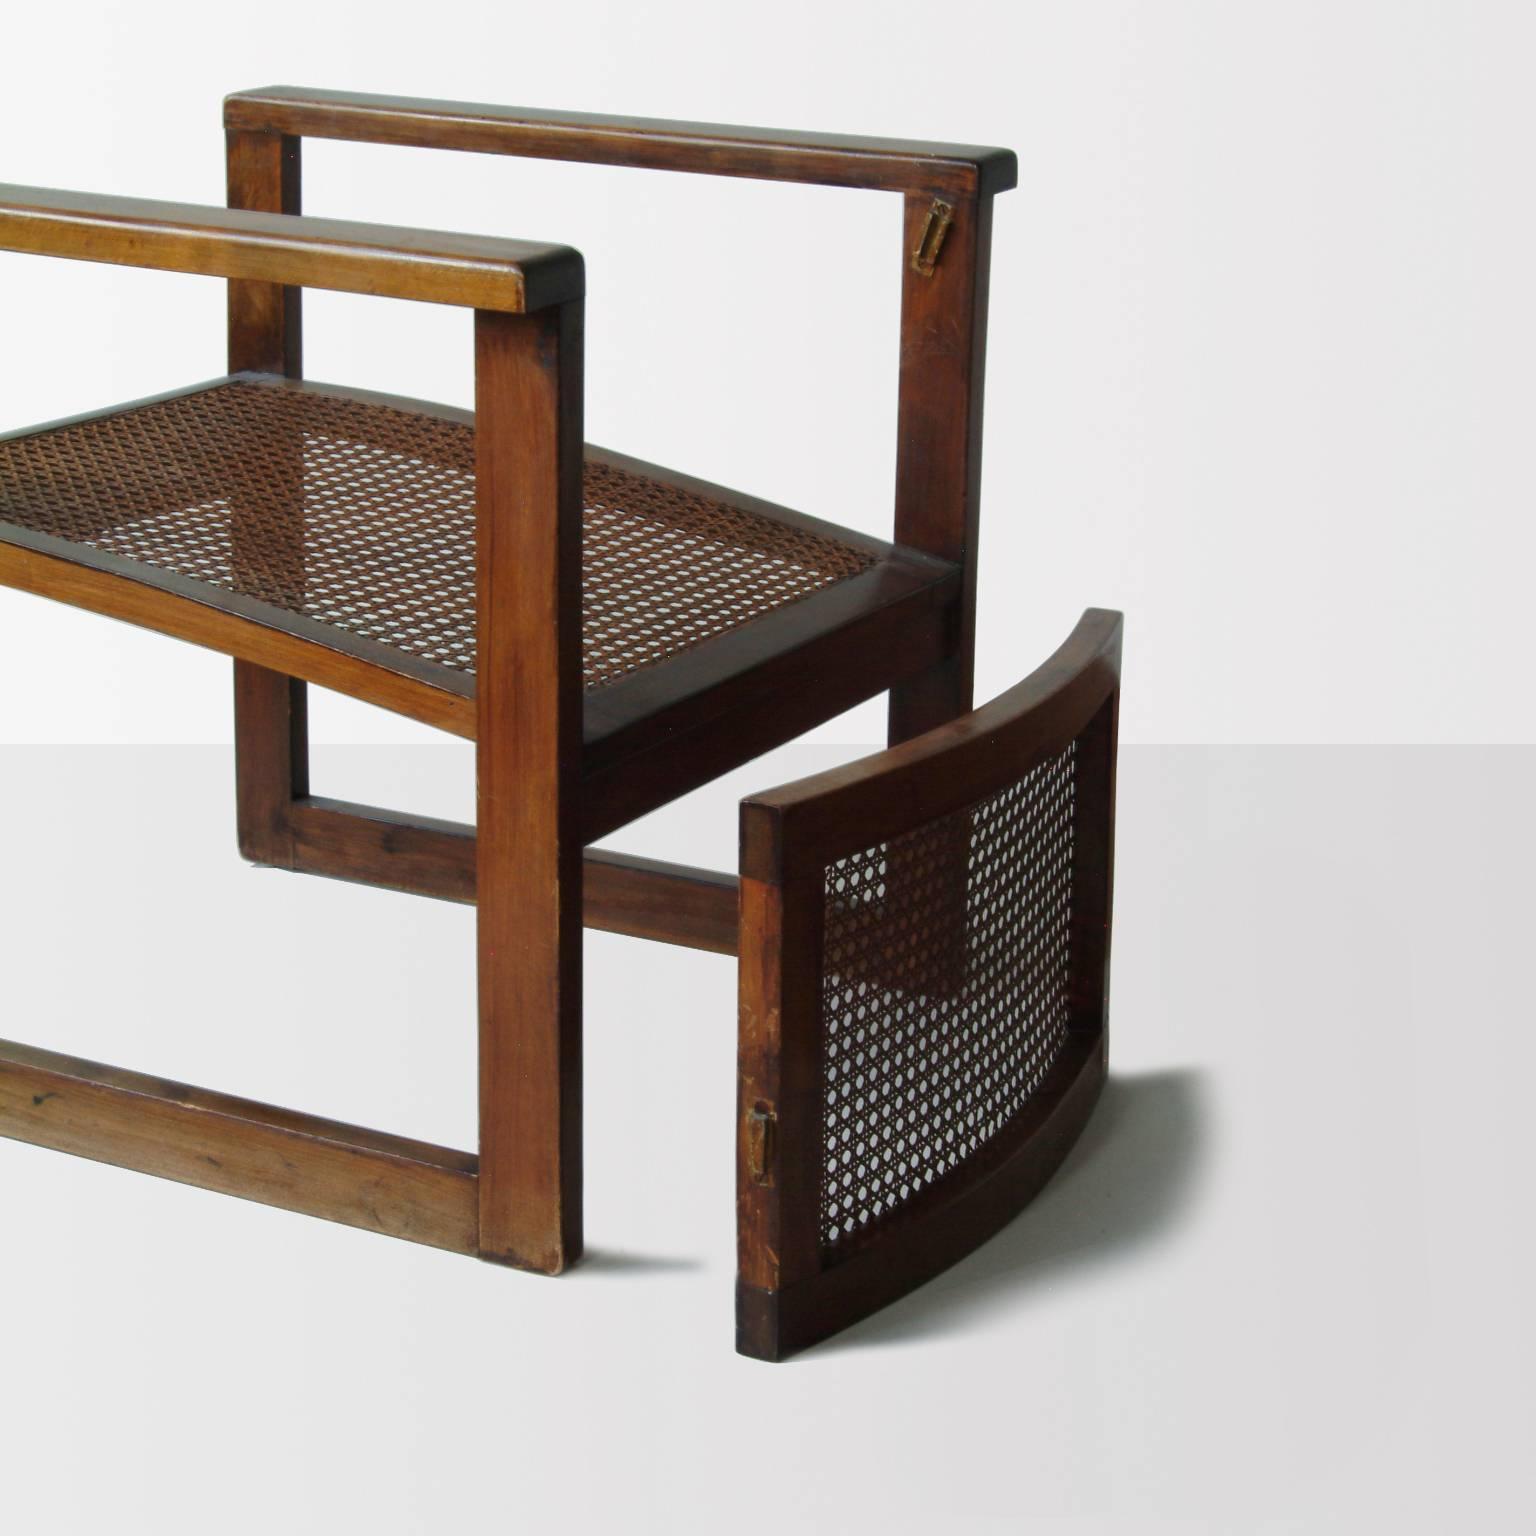 Stained Bauhaus Wooden Armchairs Pair by Peter Keler, Manufactured by Albert Walde, 1930